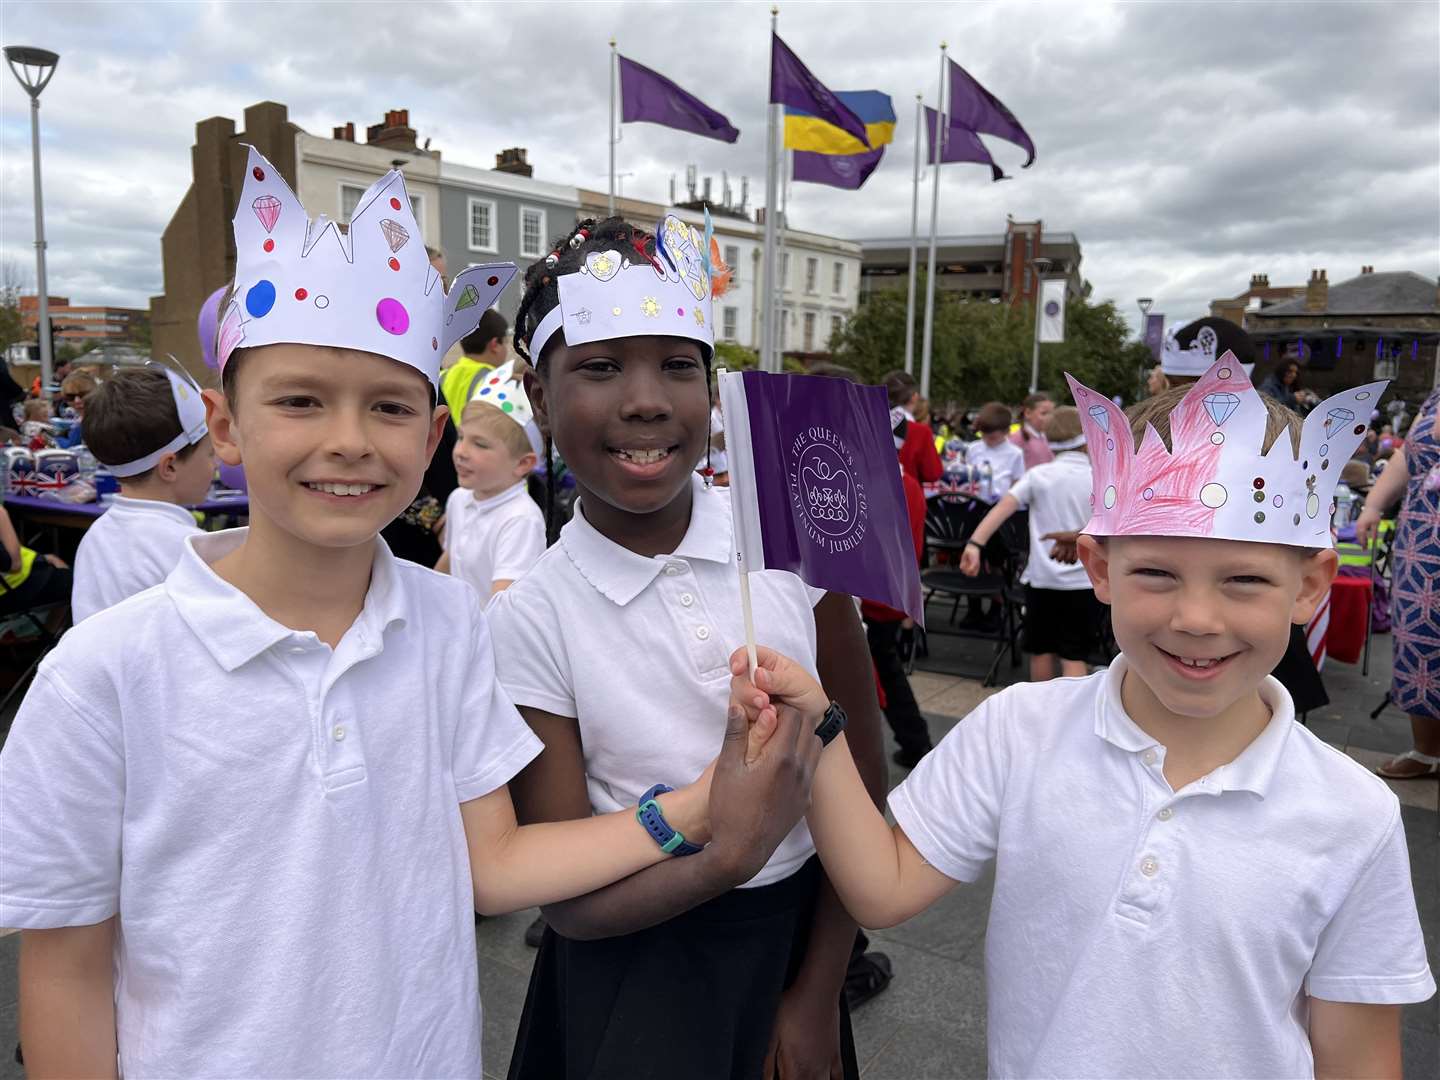 St George's School pupils Alex (left), Pamilerin (centre), and Evan (right) at the Gravesend Platinum Jubilee Party